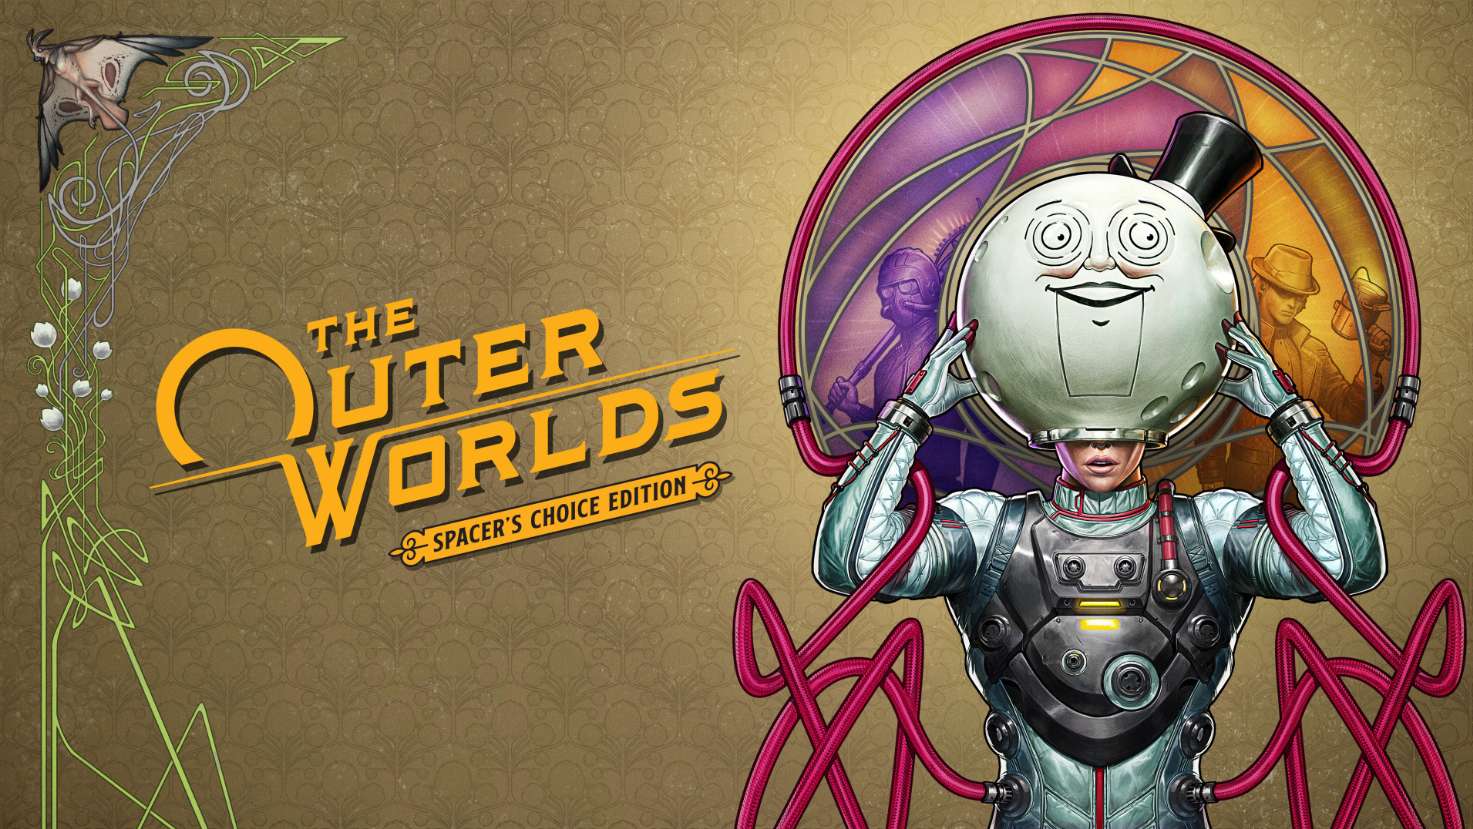 The Outer Worlds: Spacer s Choice Edition